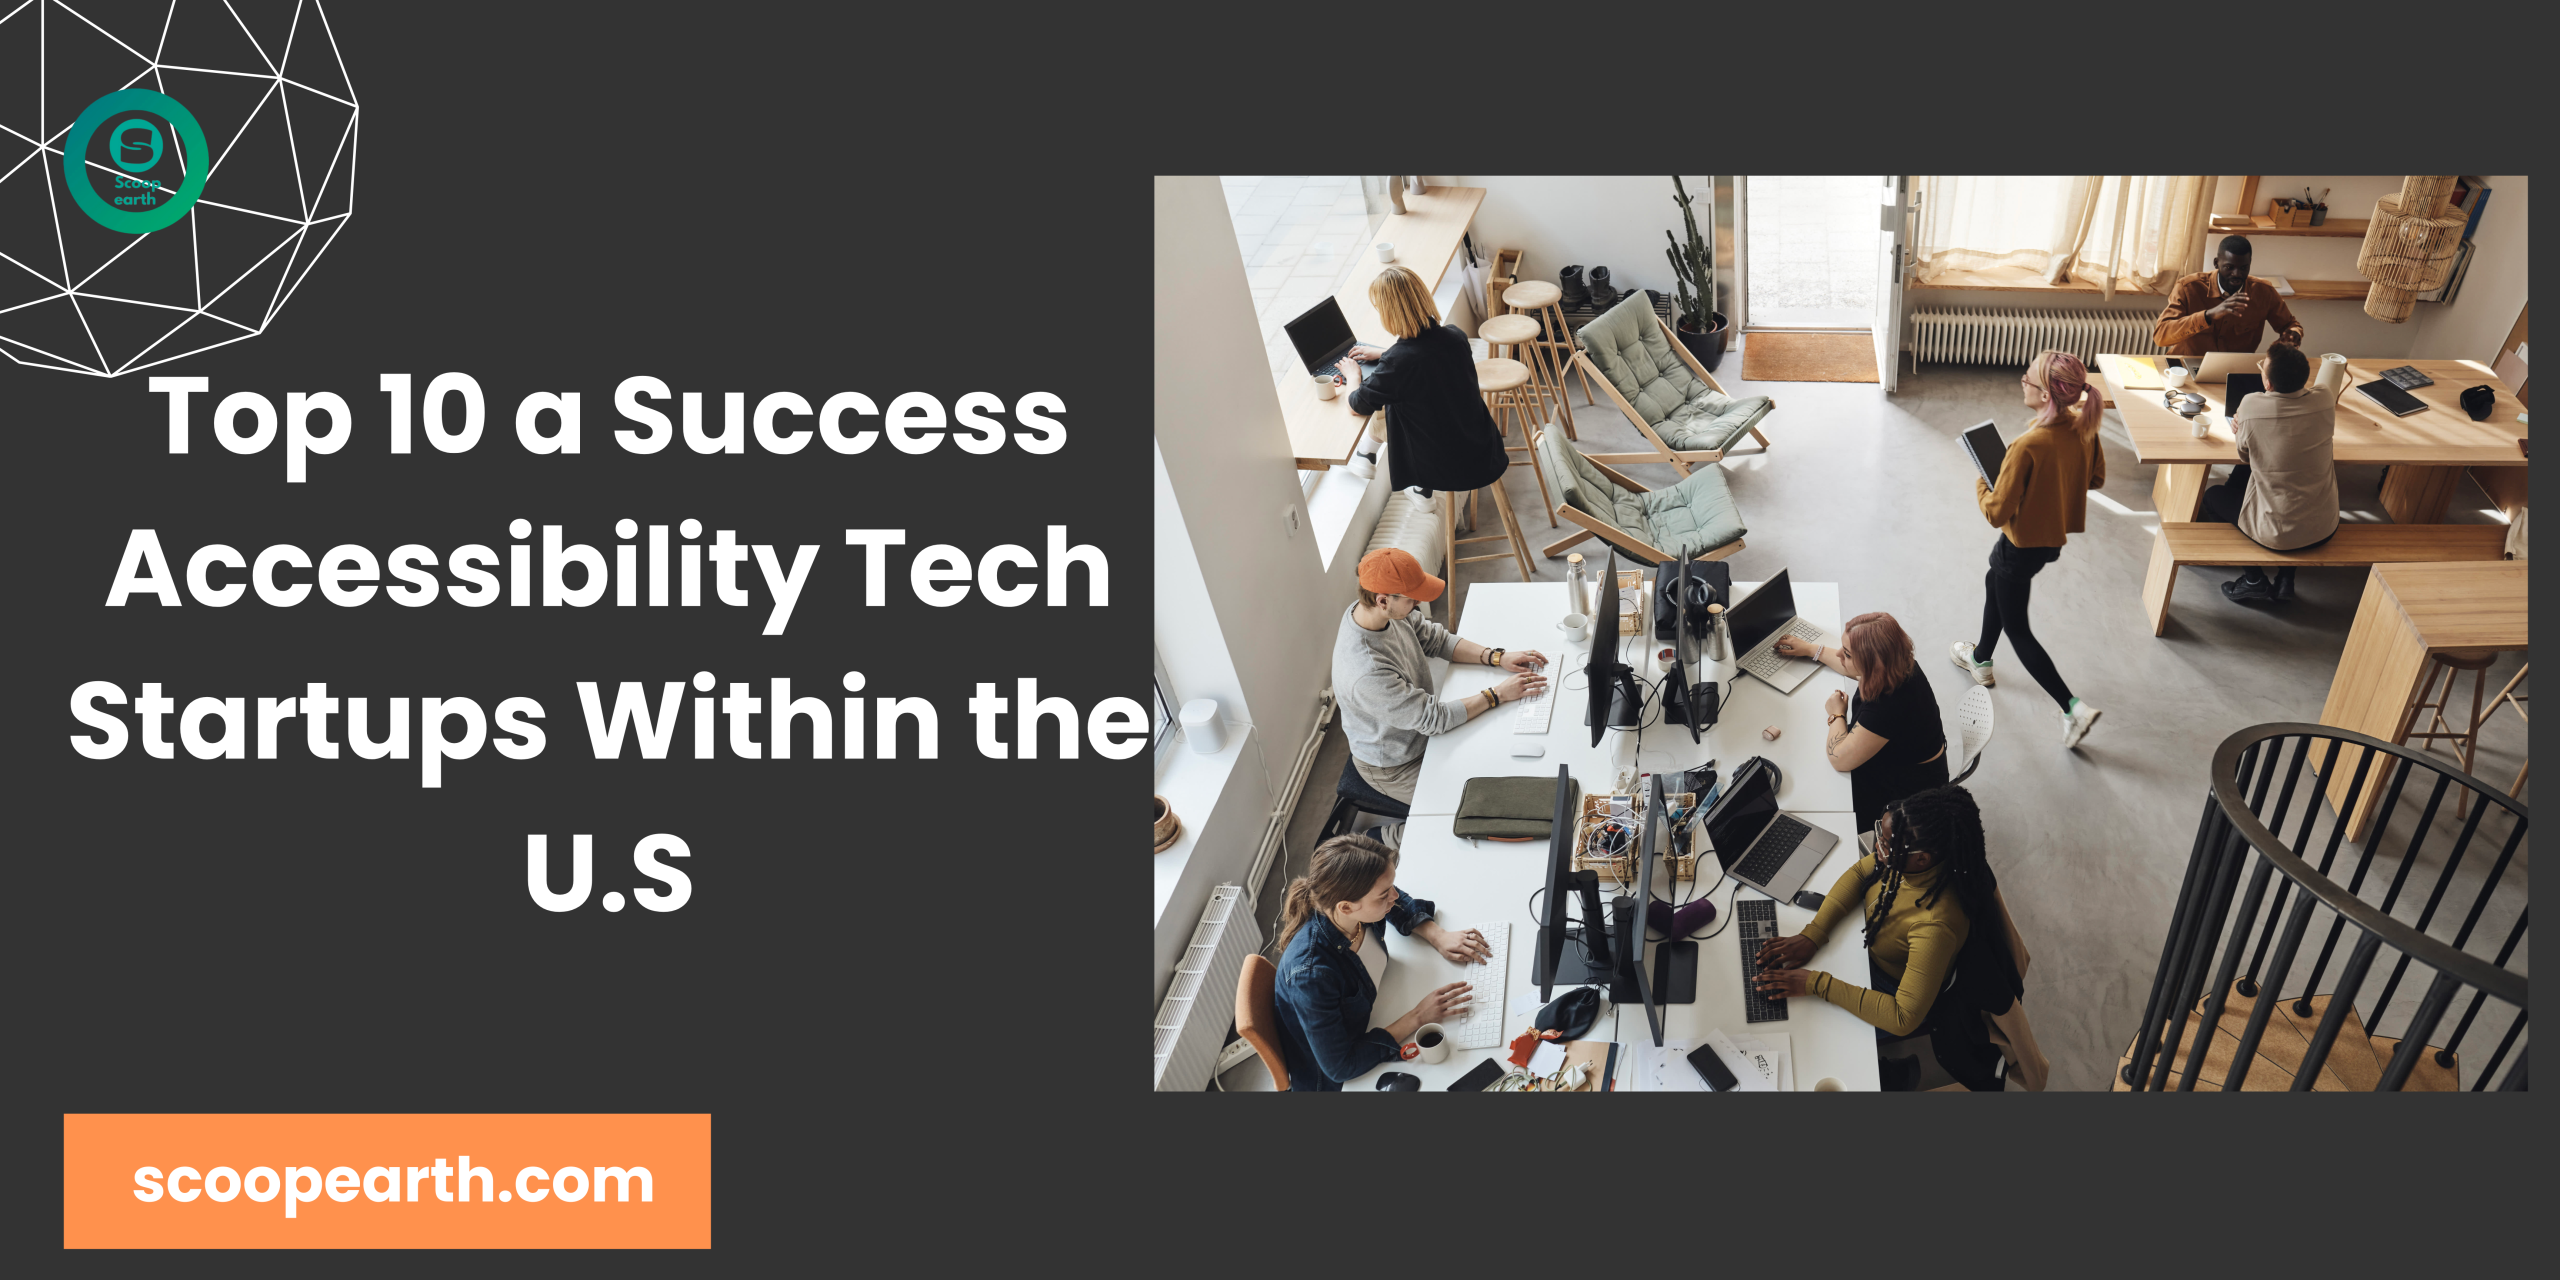 Top 10 a Success Accessibility Tech Startups Within the U.S